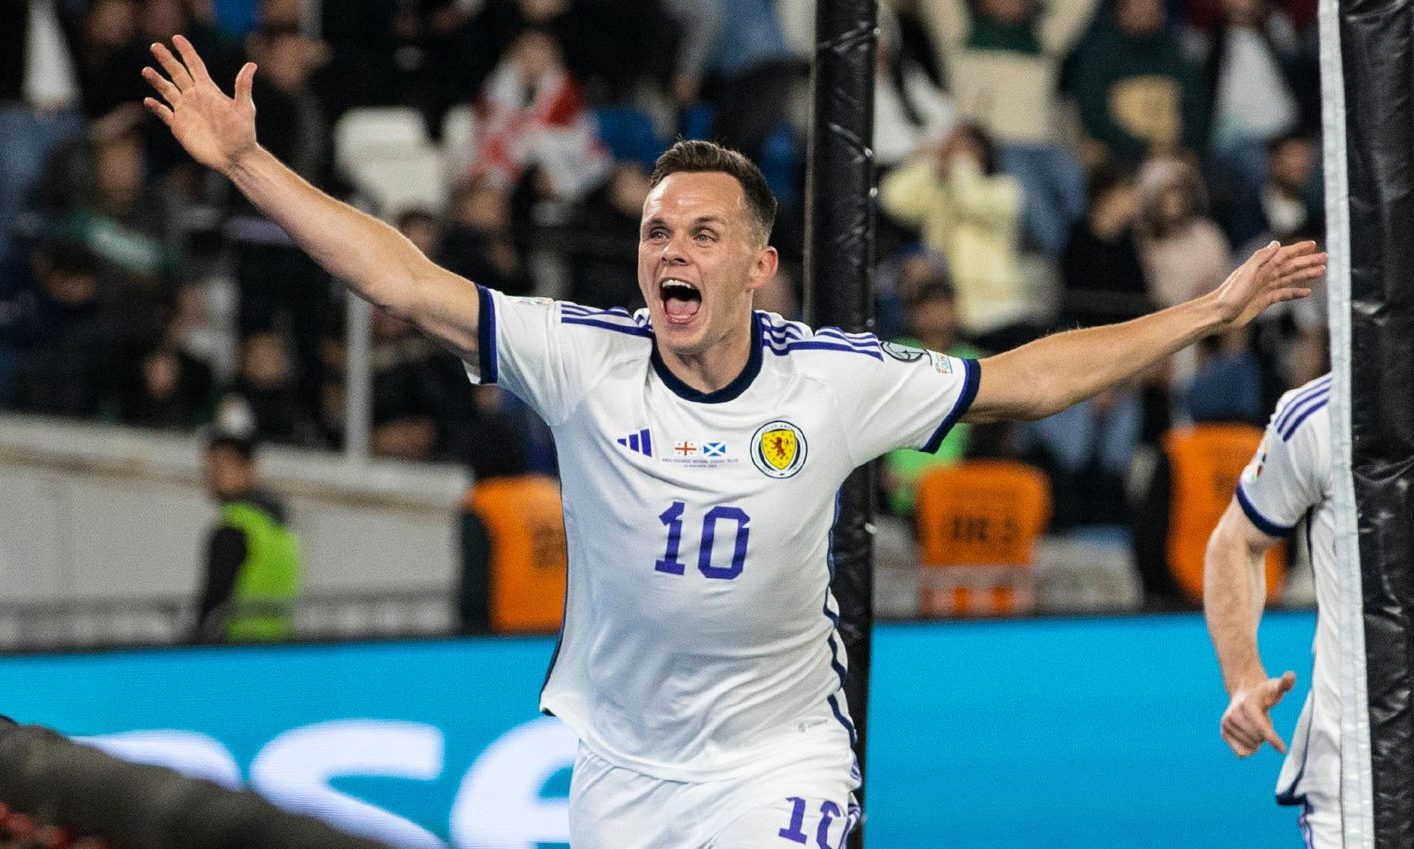 Scotland's Lawrence Shankland celebrates after scoring to make it 2-2 during the Uefa Euro 2024 qualifier in Georgia.